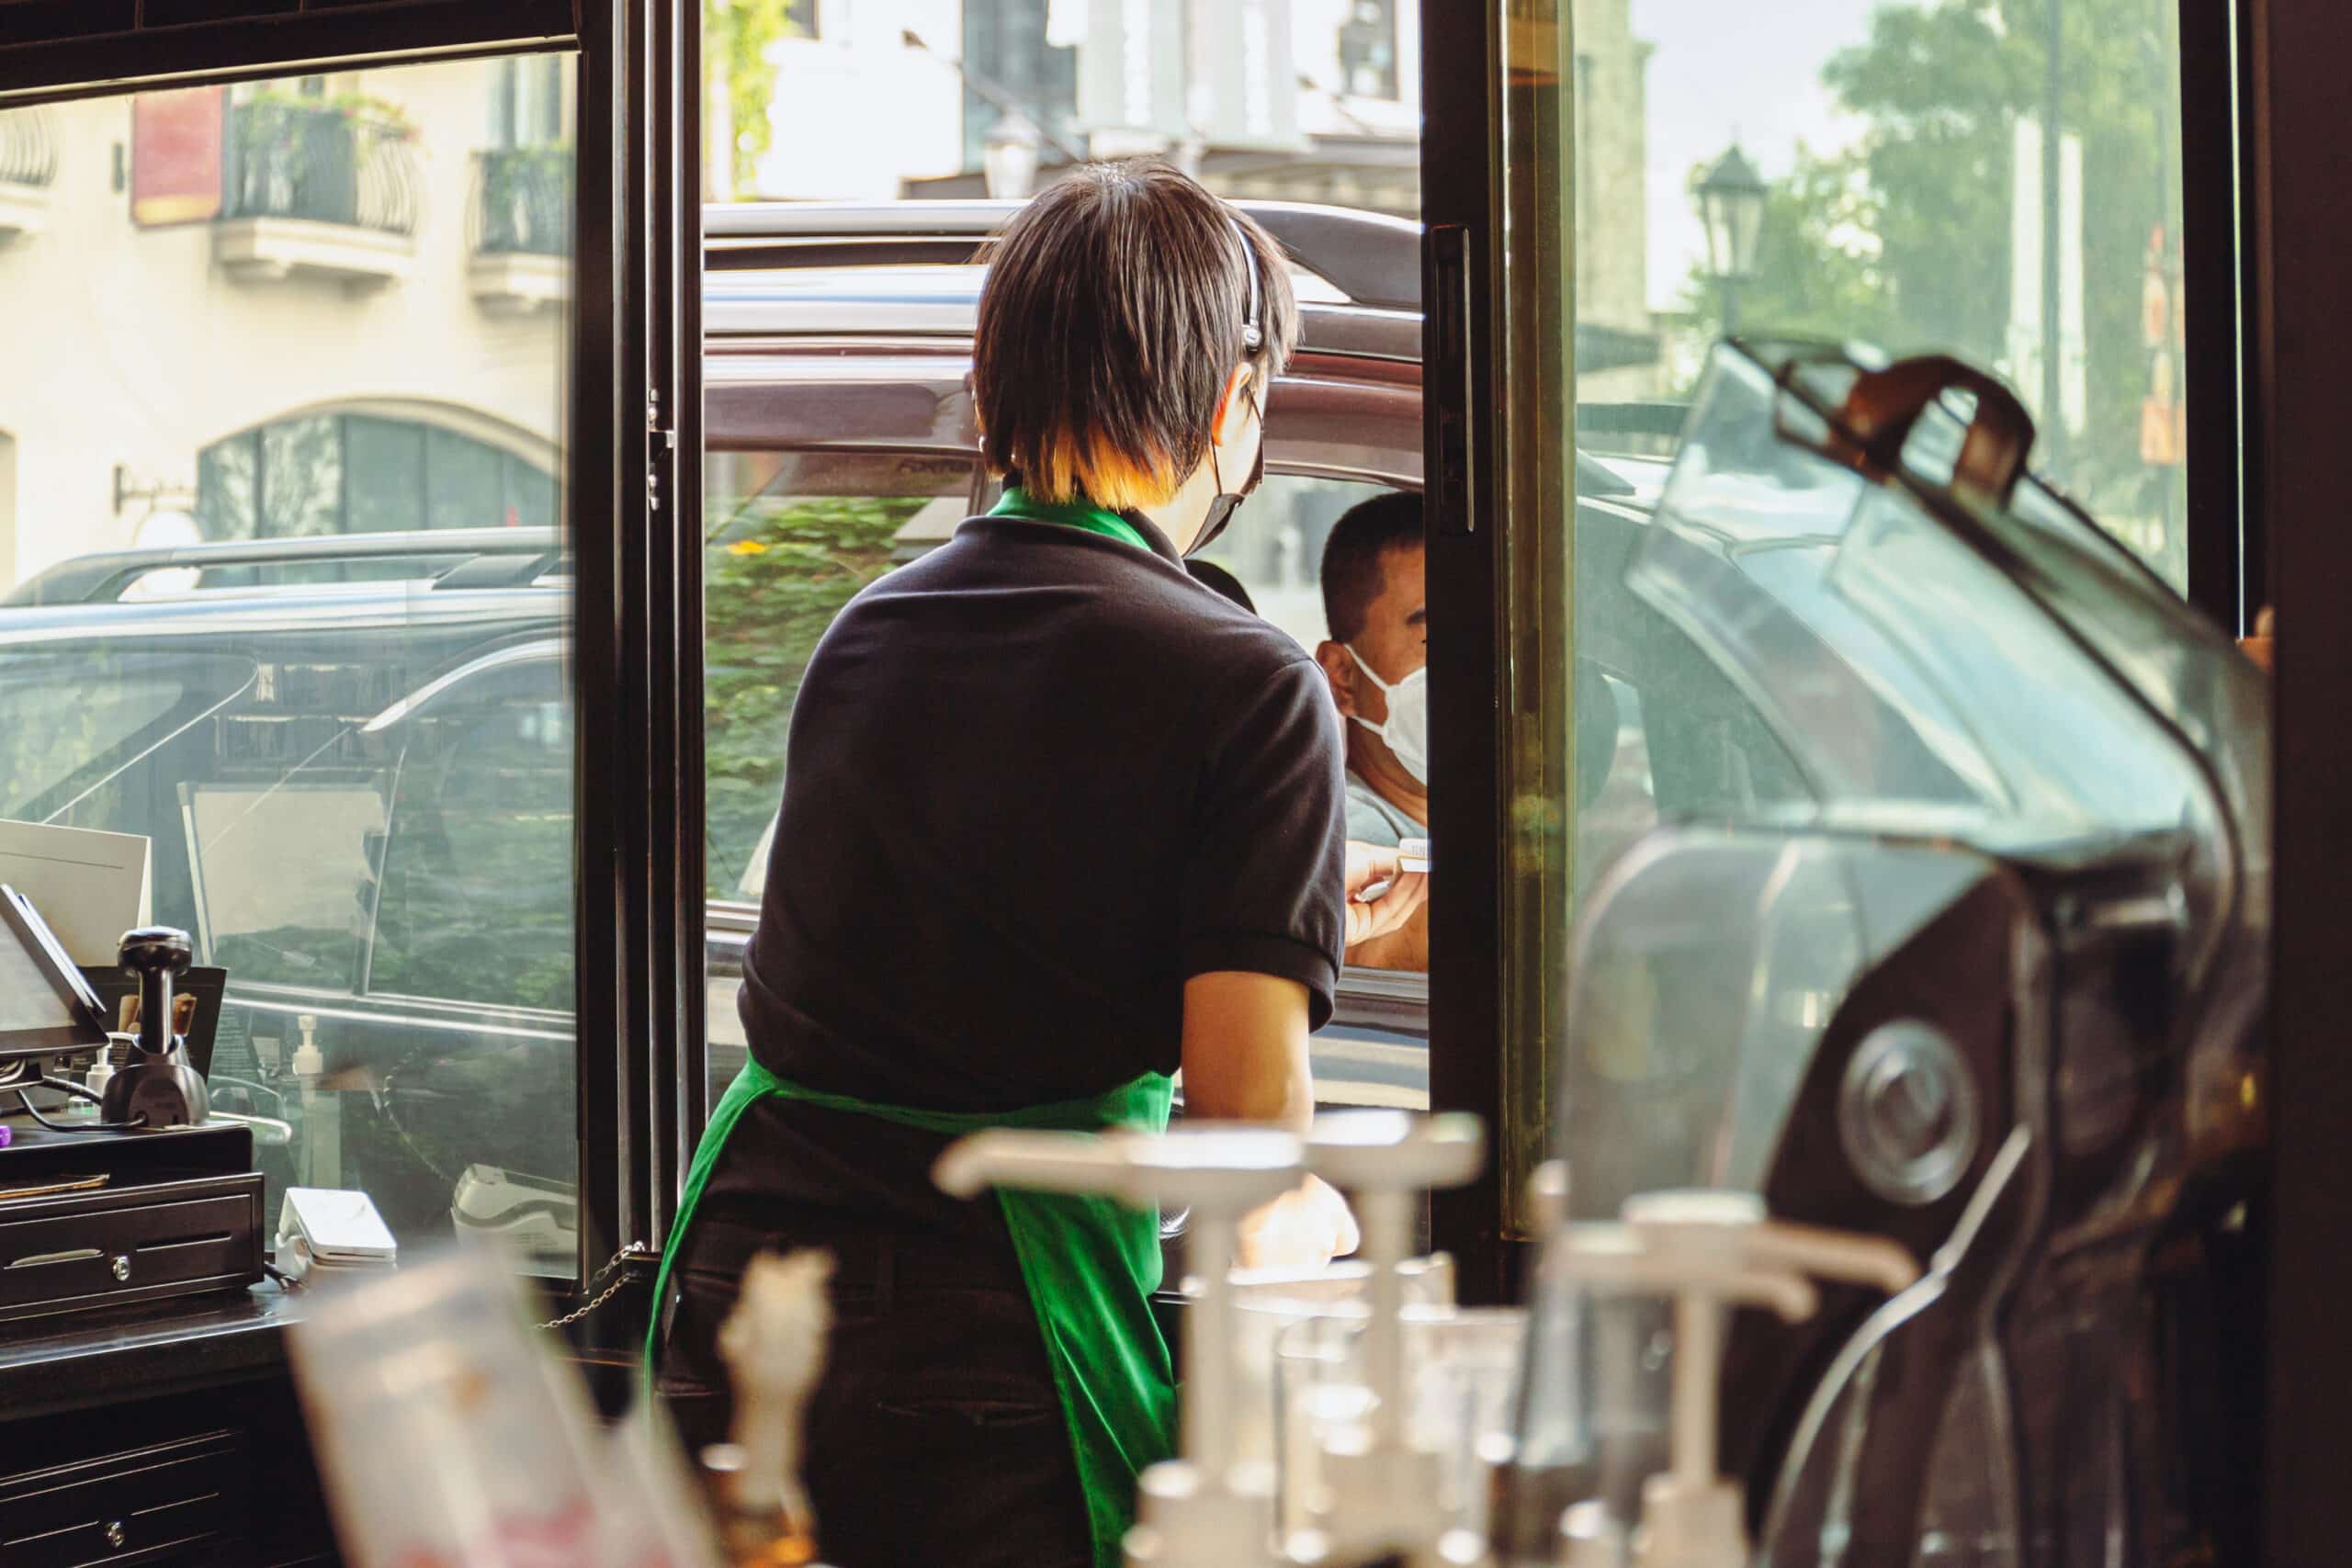 Coffee shop staff with protective mask serving coffee to customer at drive thru.